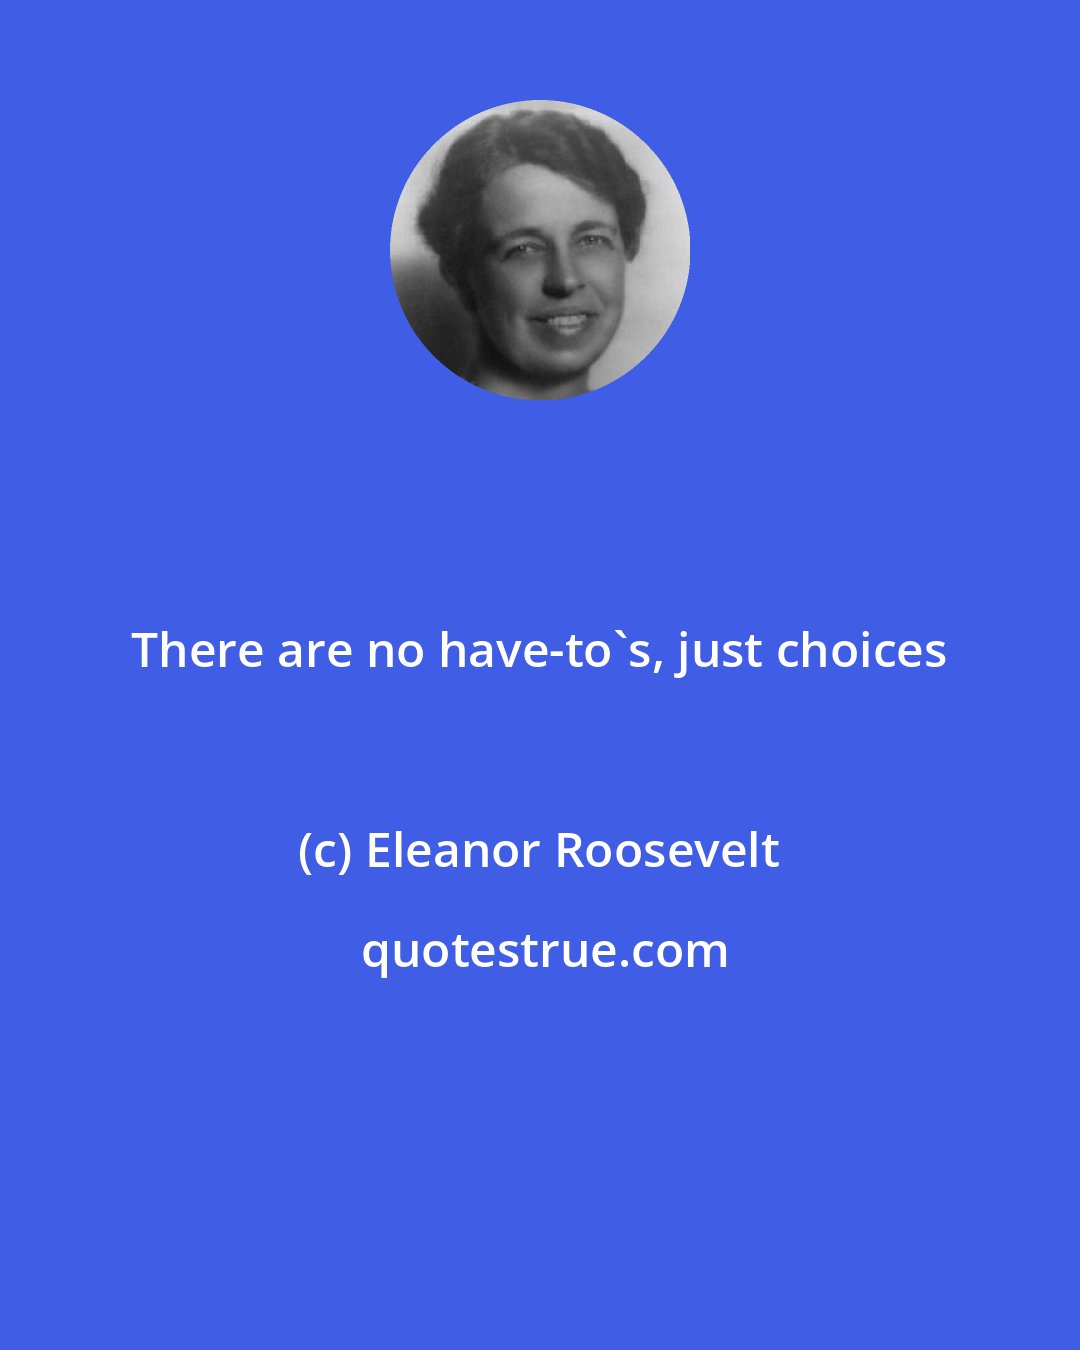 Eleanor Roosevelt: There are no have-to's, just choices